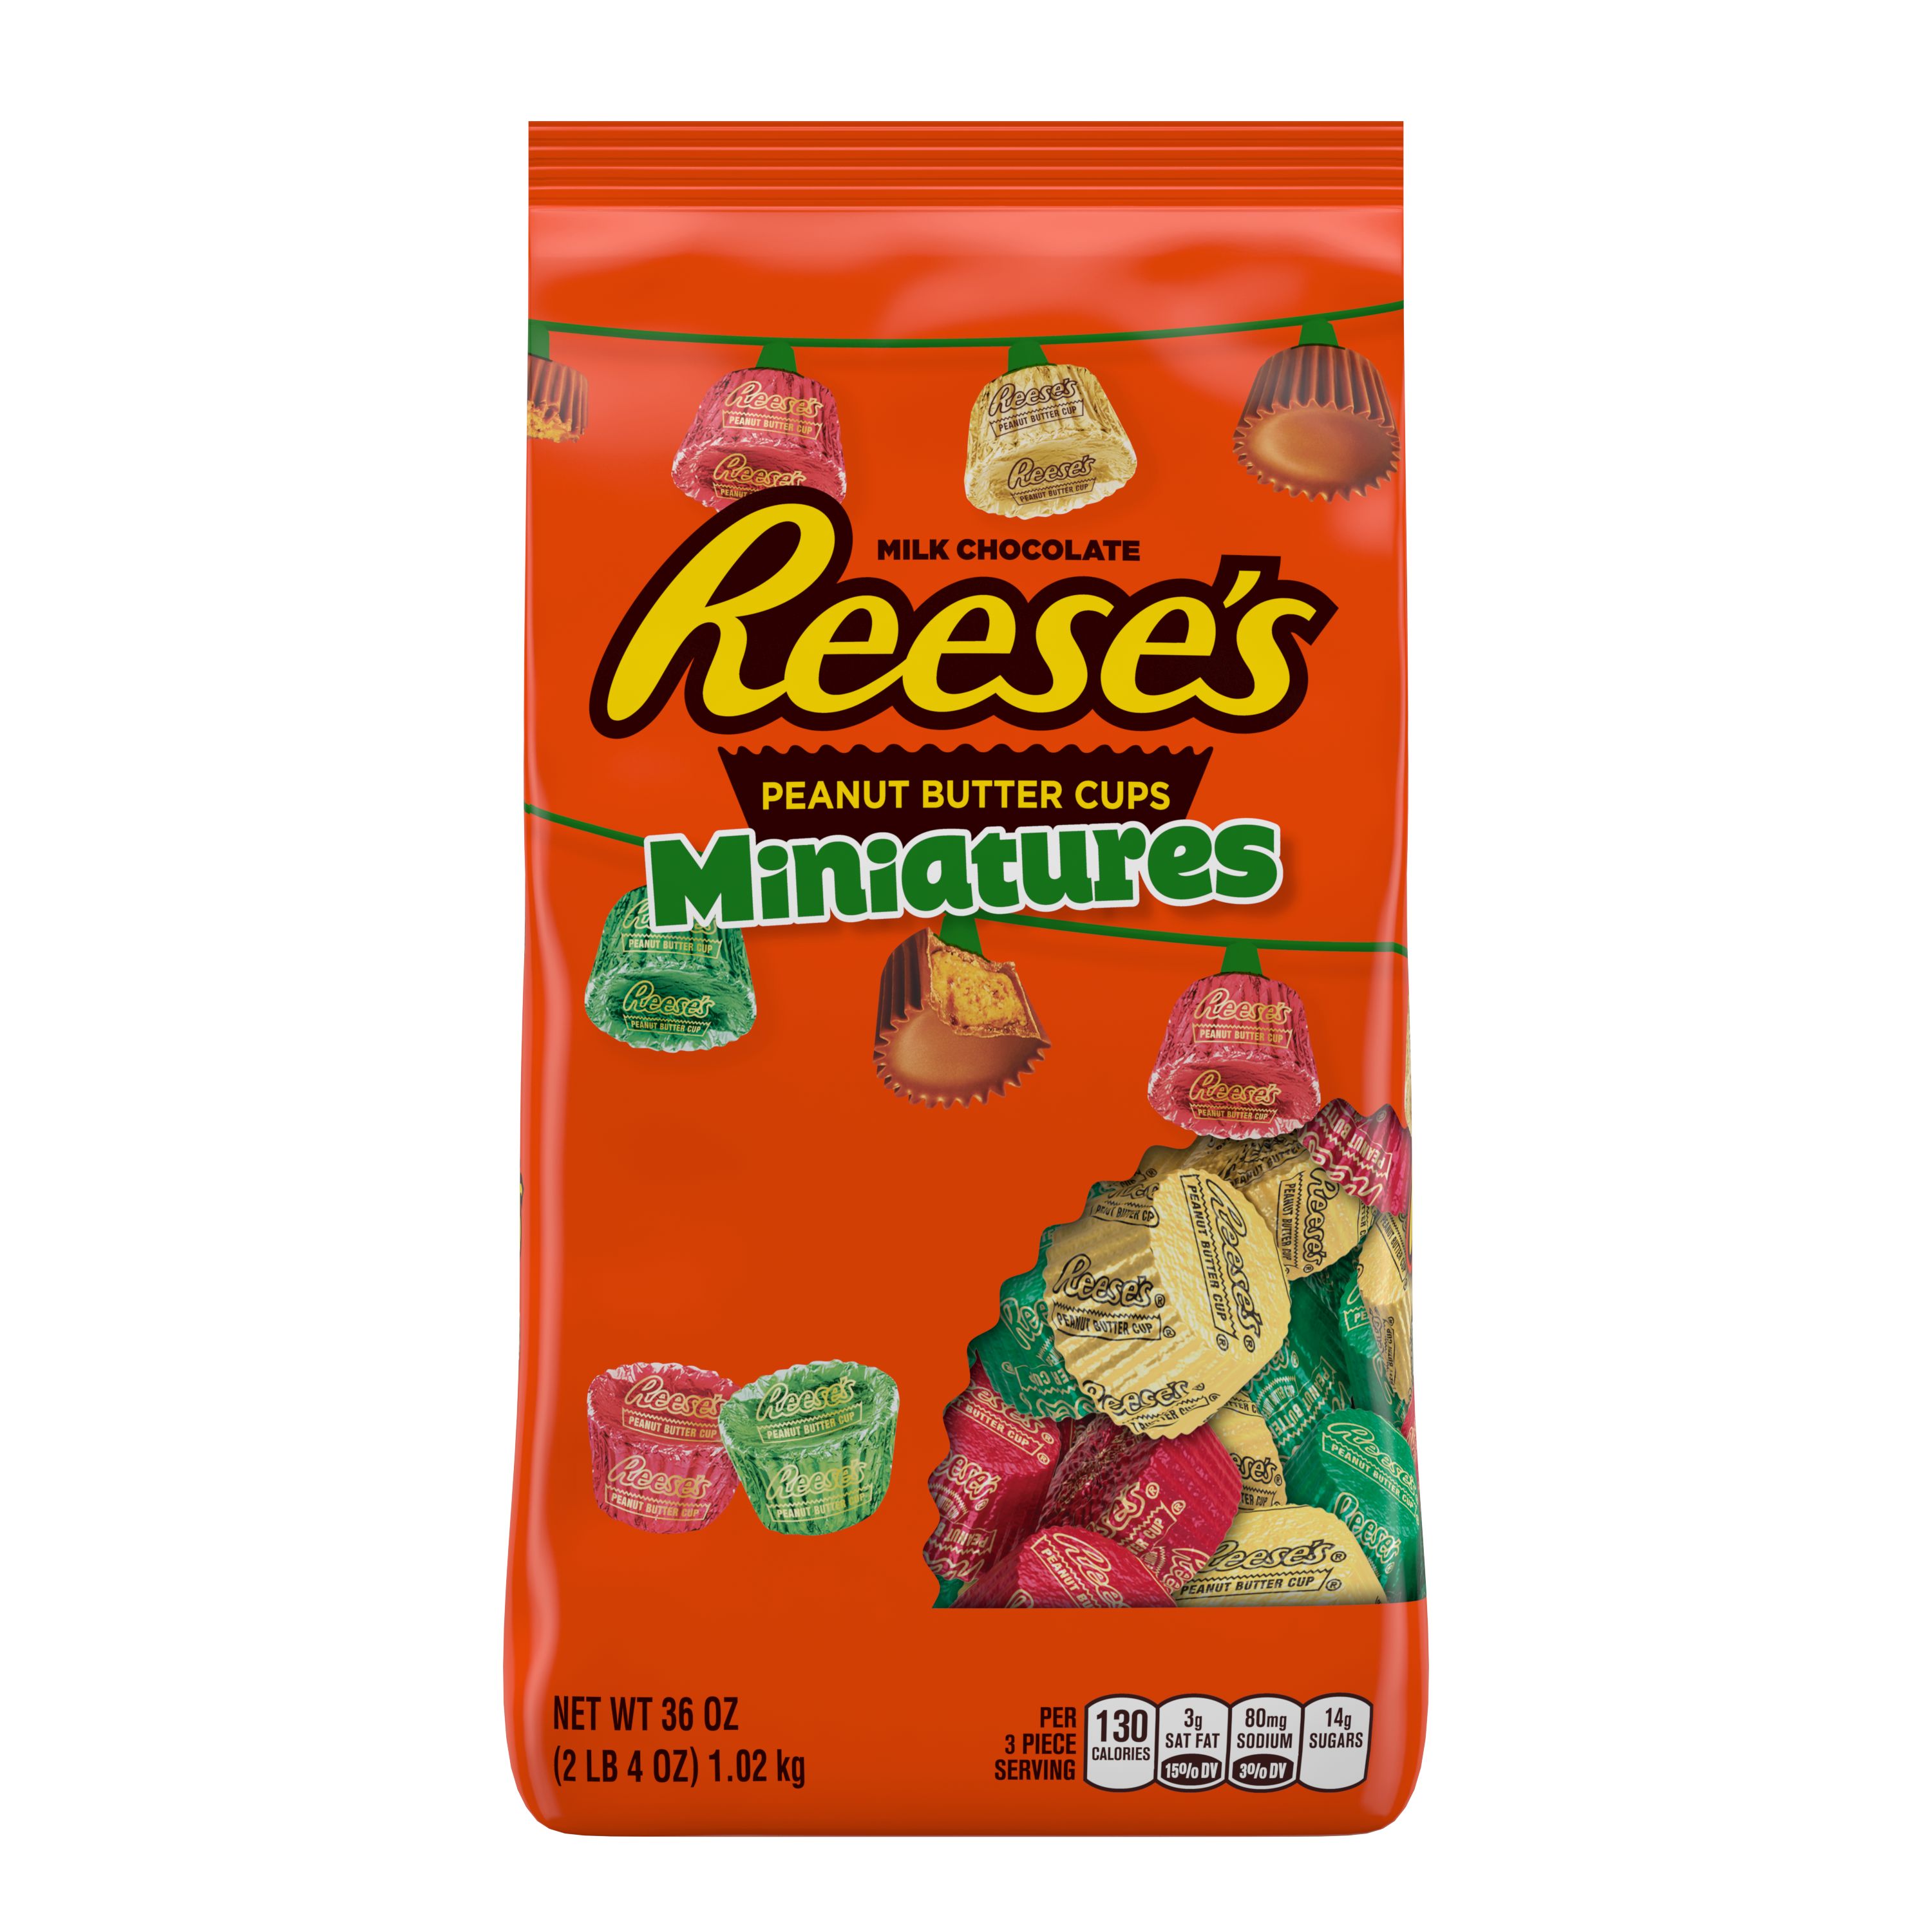 REESE'S Miniatures Milk Chocolate Peanut Butter Cups Candy, Bulk Candy, 36 oz, Bag - image 1 of 6